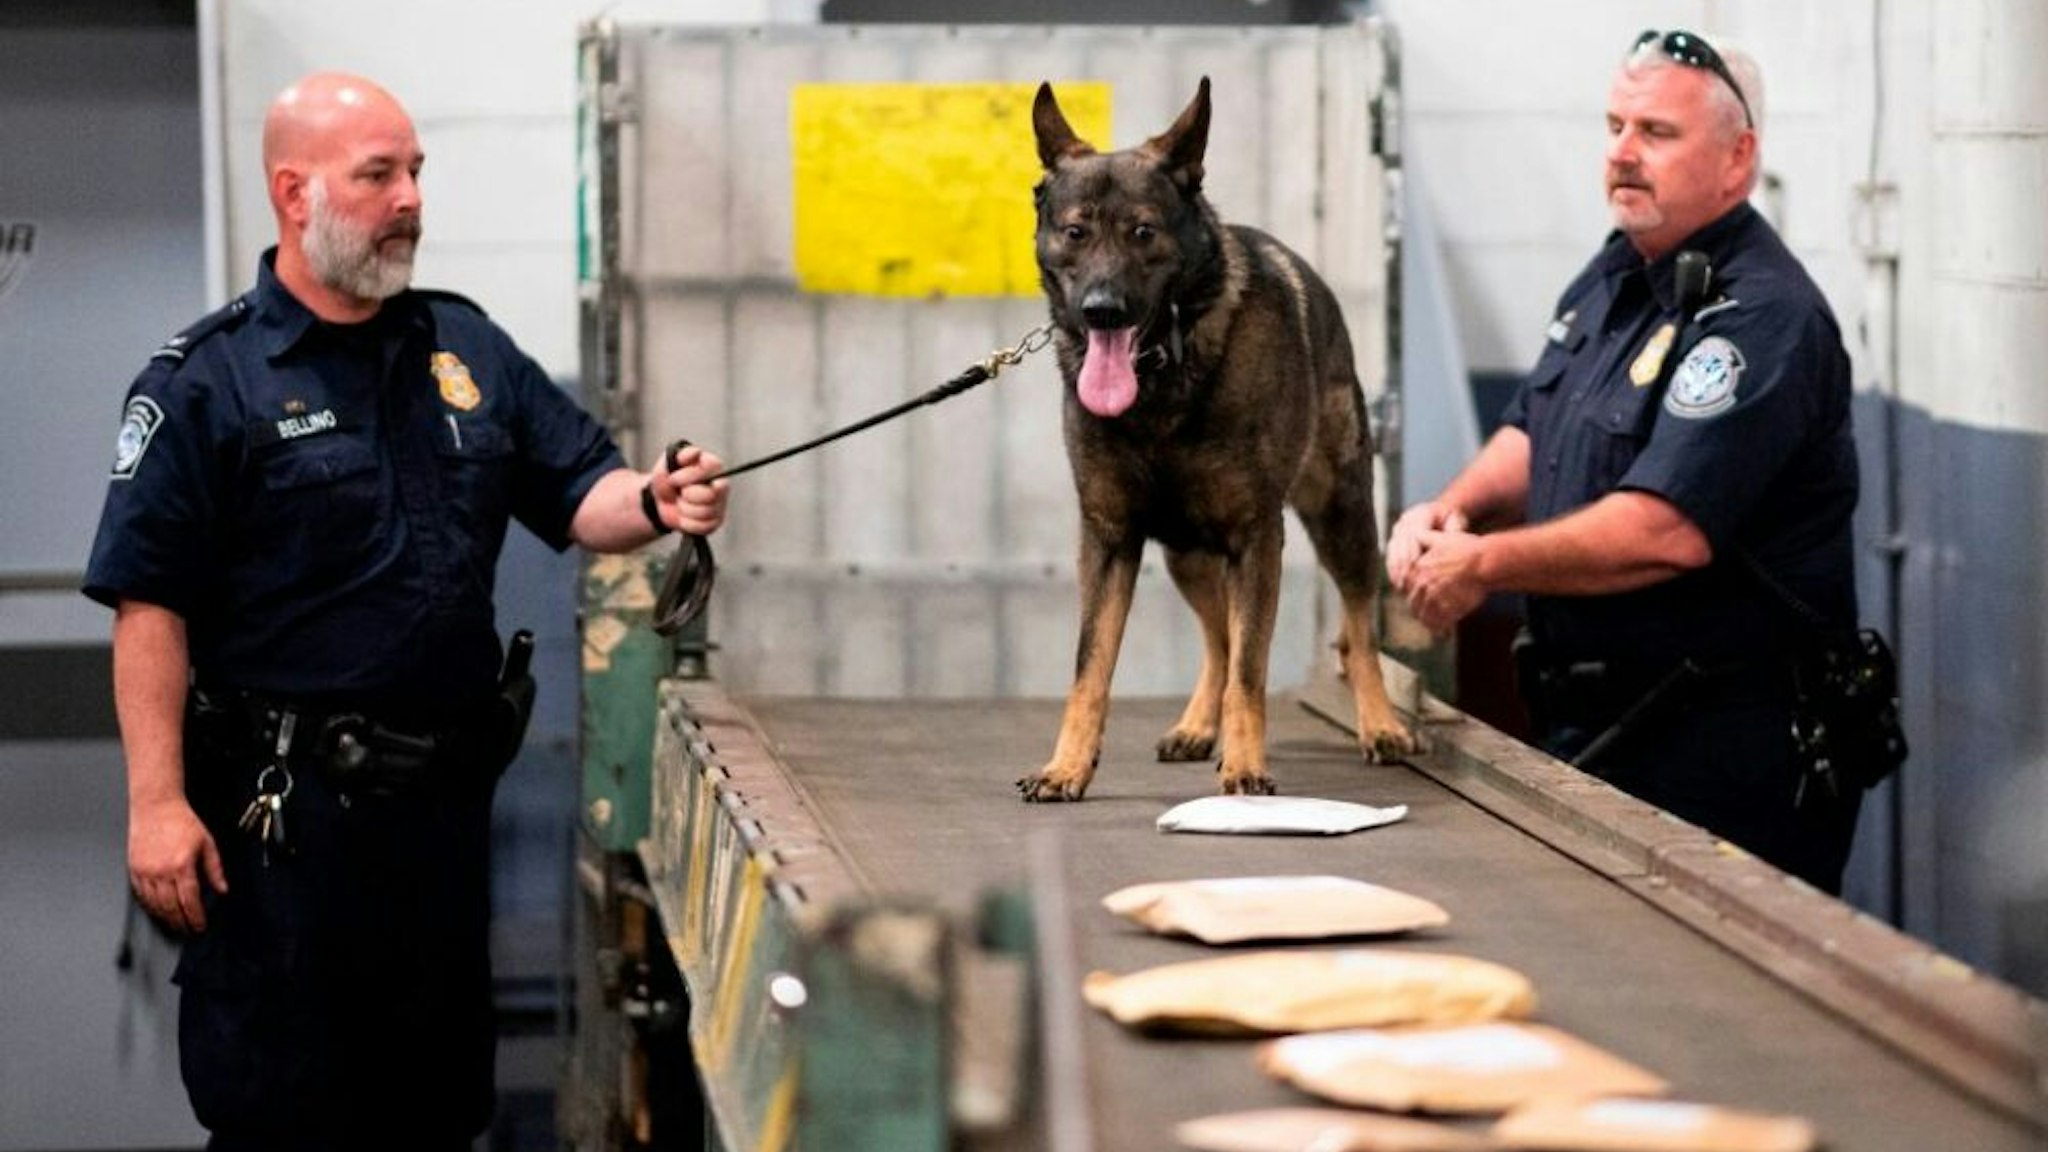 Officers from the Customs and Border Protection, Trade and Cargo Division work with a dog to check parcels at John F. Kennedy Airport's US Postal Service facility on June 24, 2019 in New York. - In a windowless hangar at New York's JFK airport, dozens of law enforcement officers sift through packages, looking for fentanyl -- a drug that is killing Americans every day. The US Postal Service facility has become one of multiple fronts in the United States' war on opioid addiction, which kills tens of thousands of people every year and ravages communities.